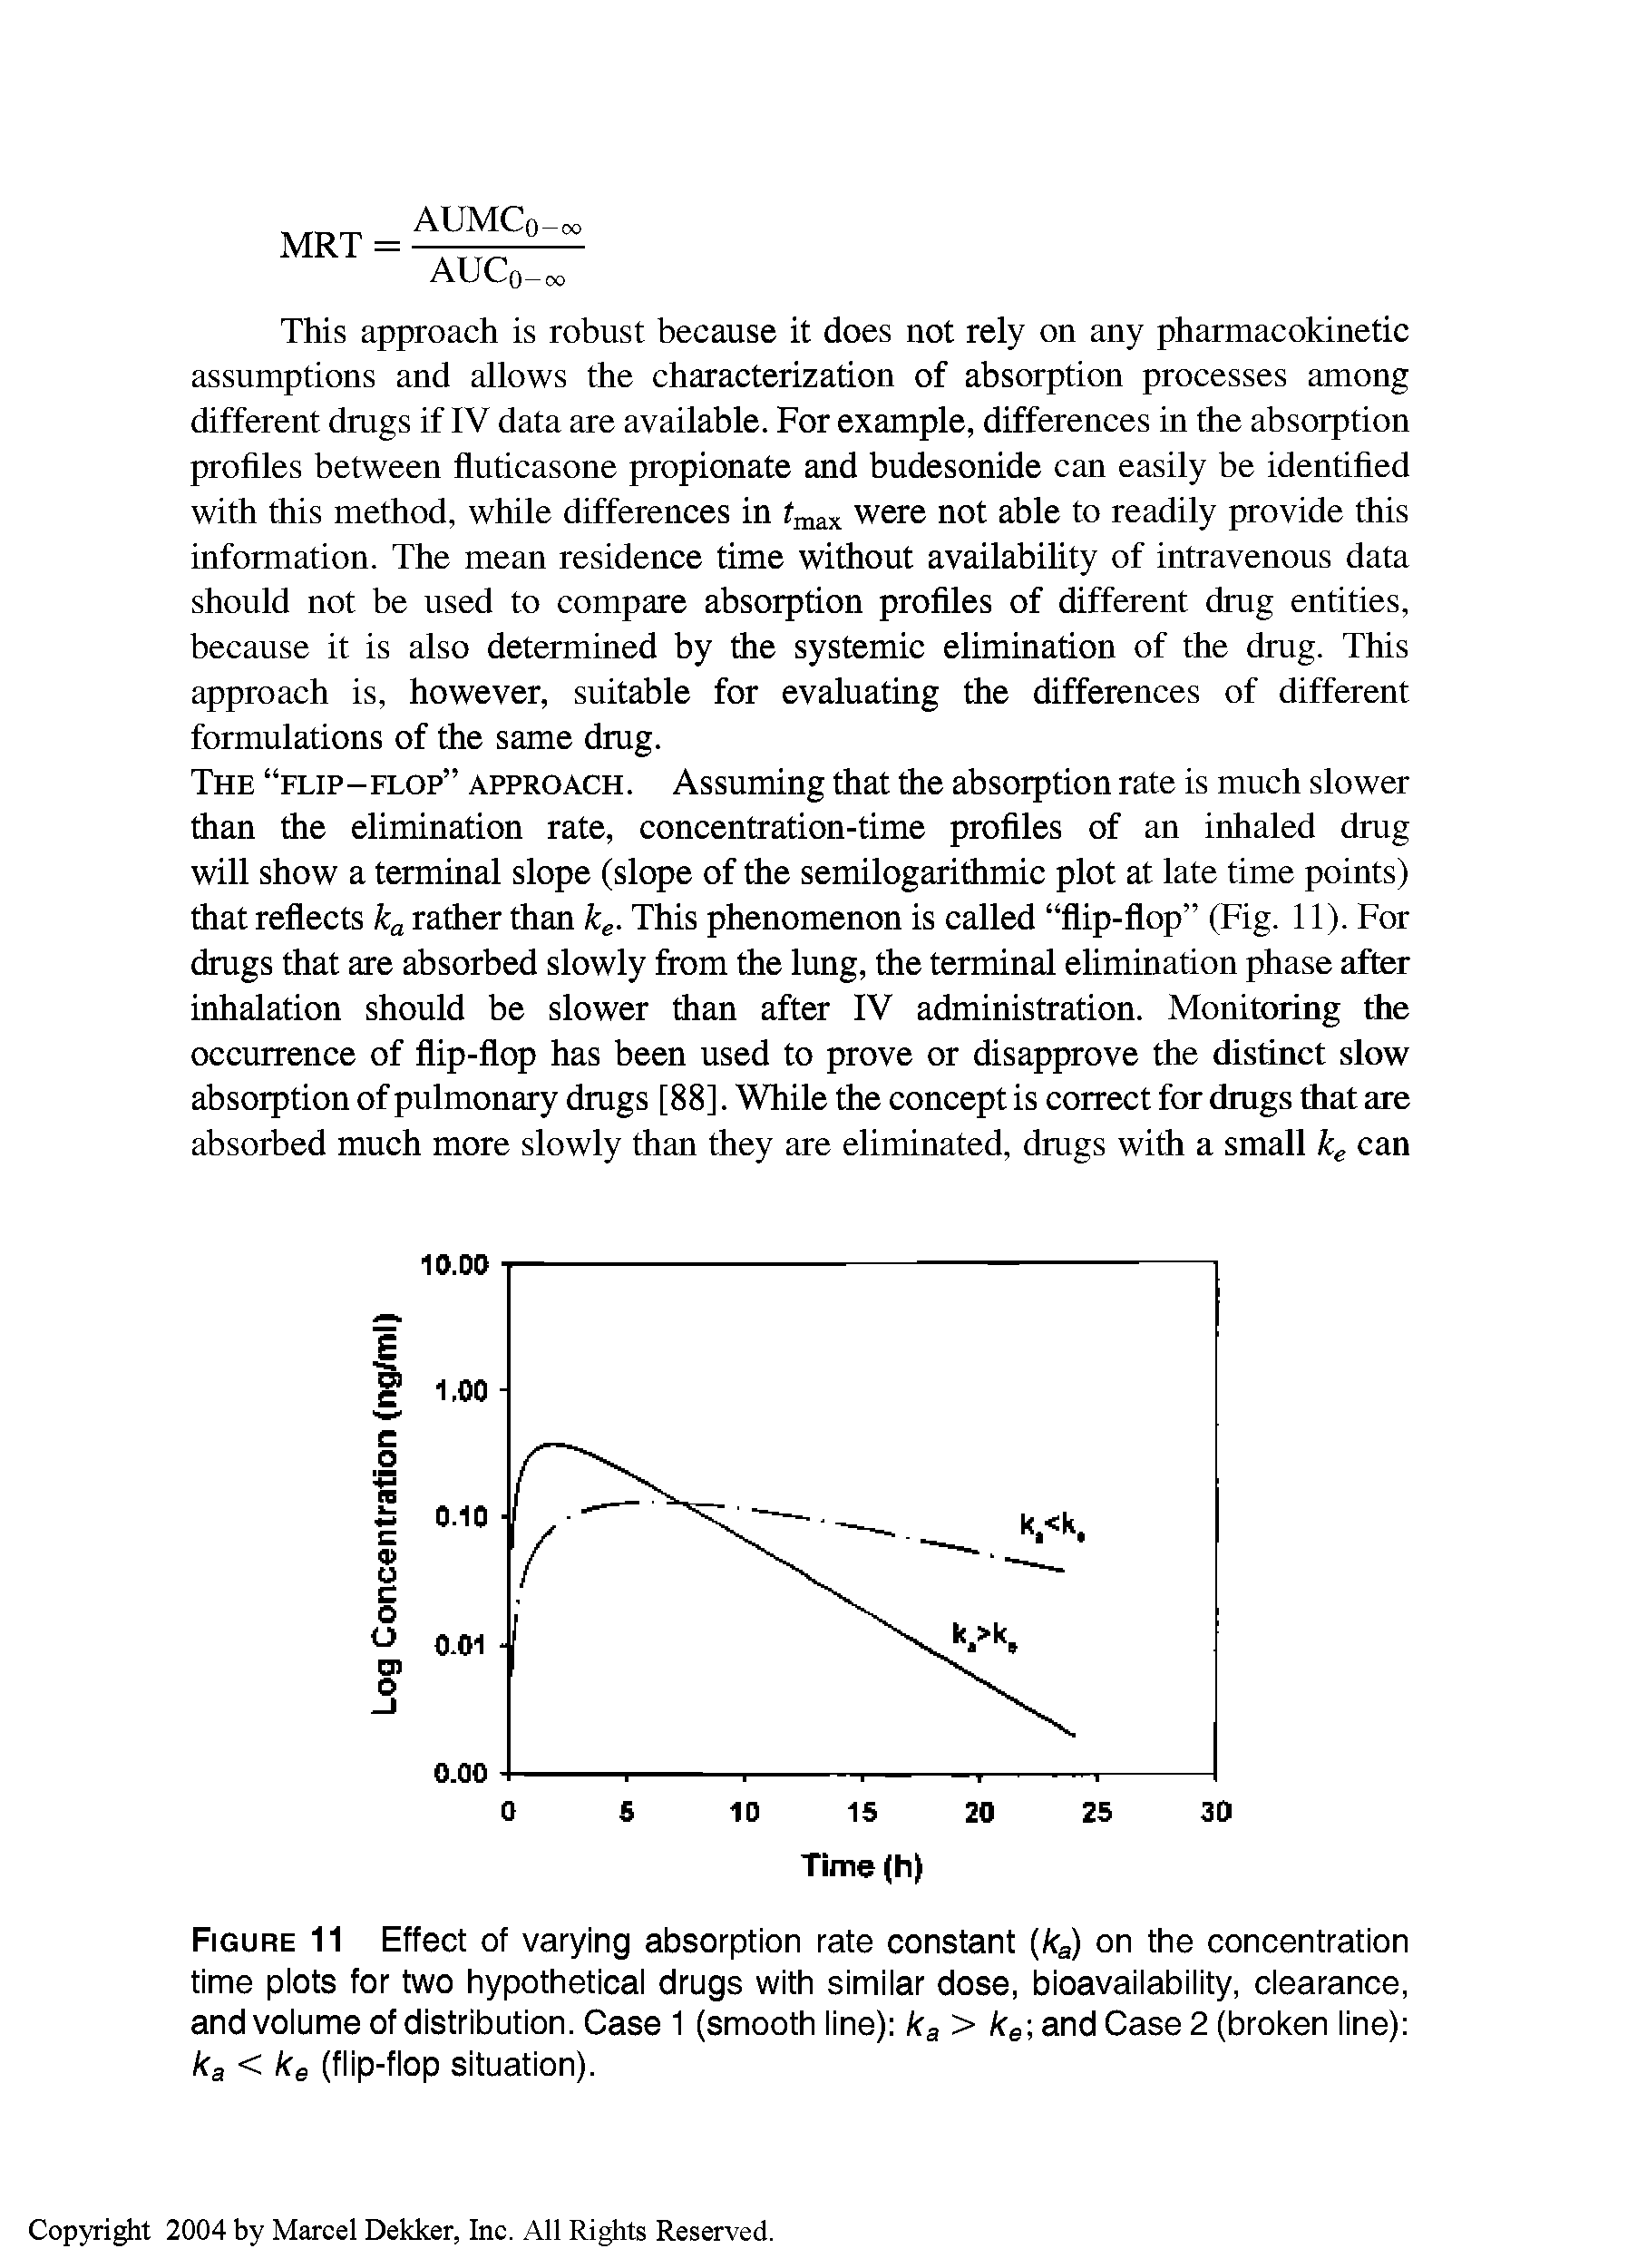 Figure 11 Effect of varying absorption rate constant (ka) on the concentration time plots for two hypothetical drugs with similar dose, bioavailability, clearance, and volume of distribution. Case 1 (smooth line) ka > ke and Case 2 (broken line) ka < ke (flip-flop situation).